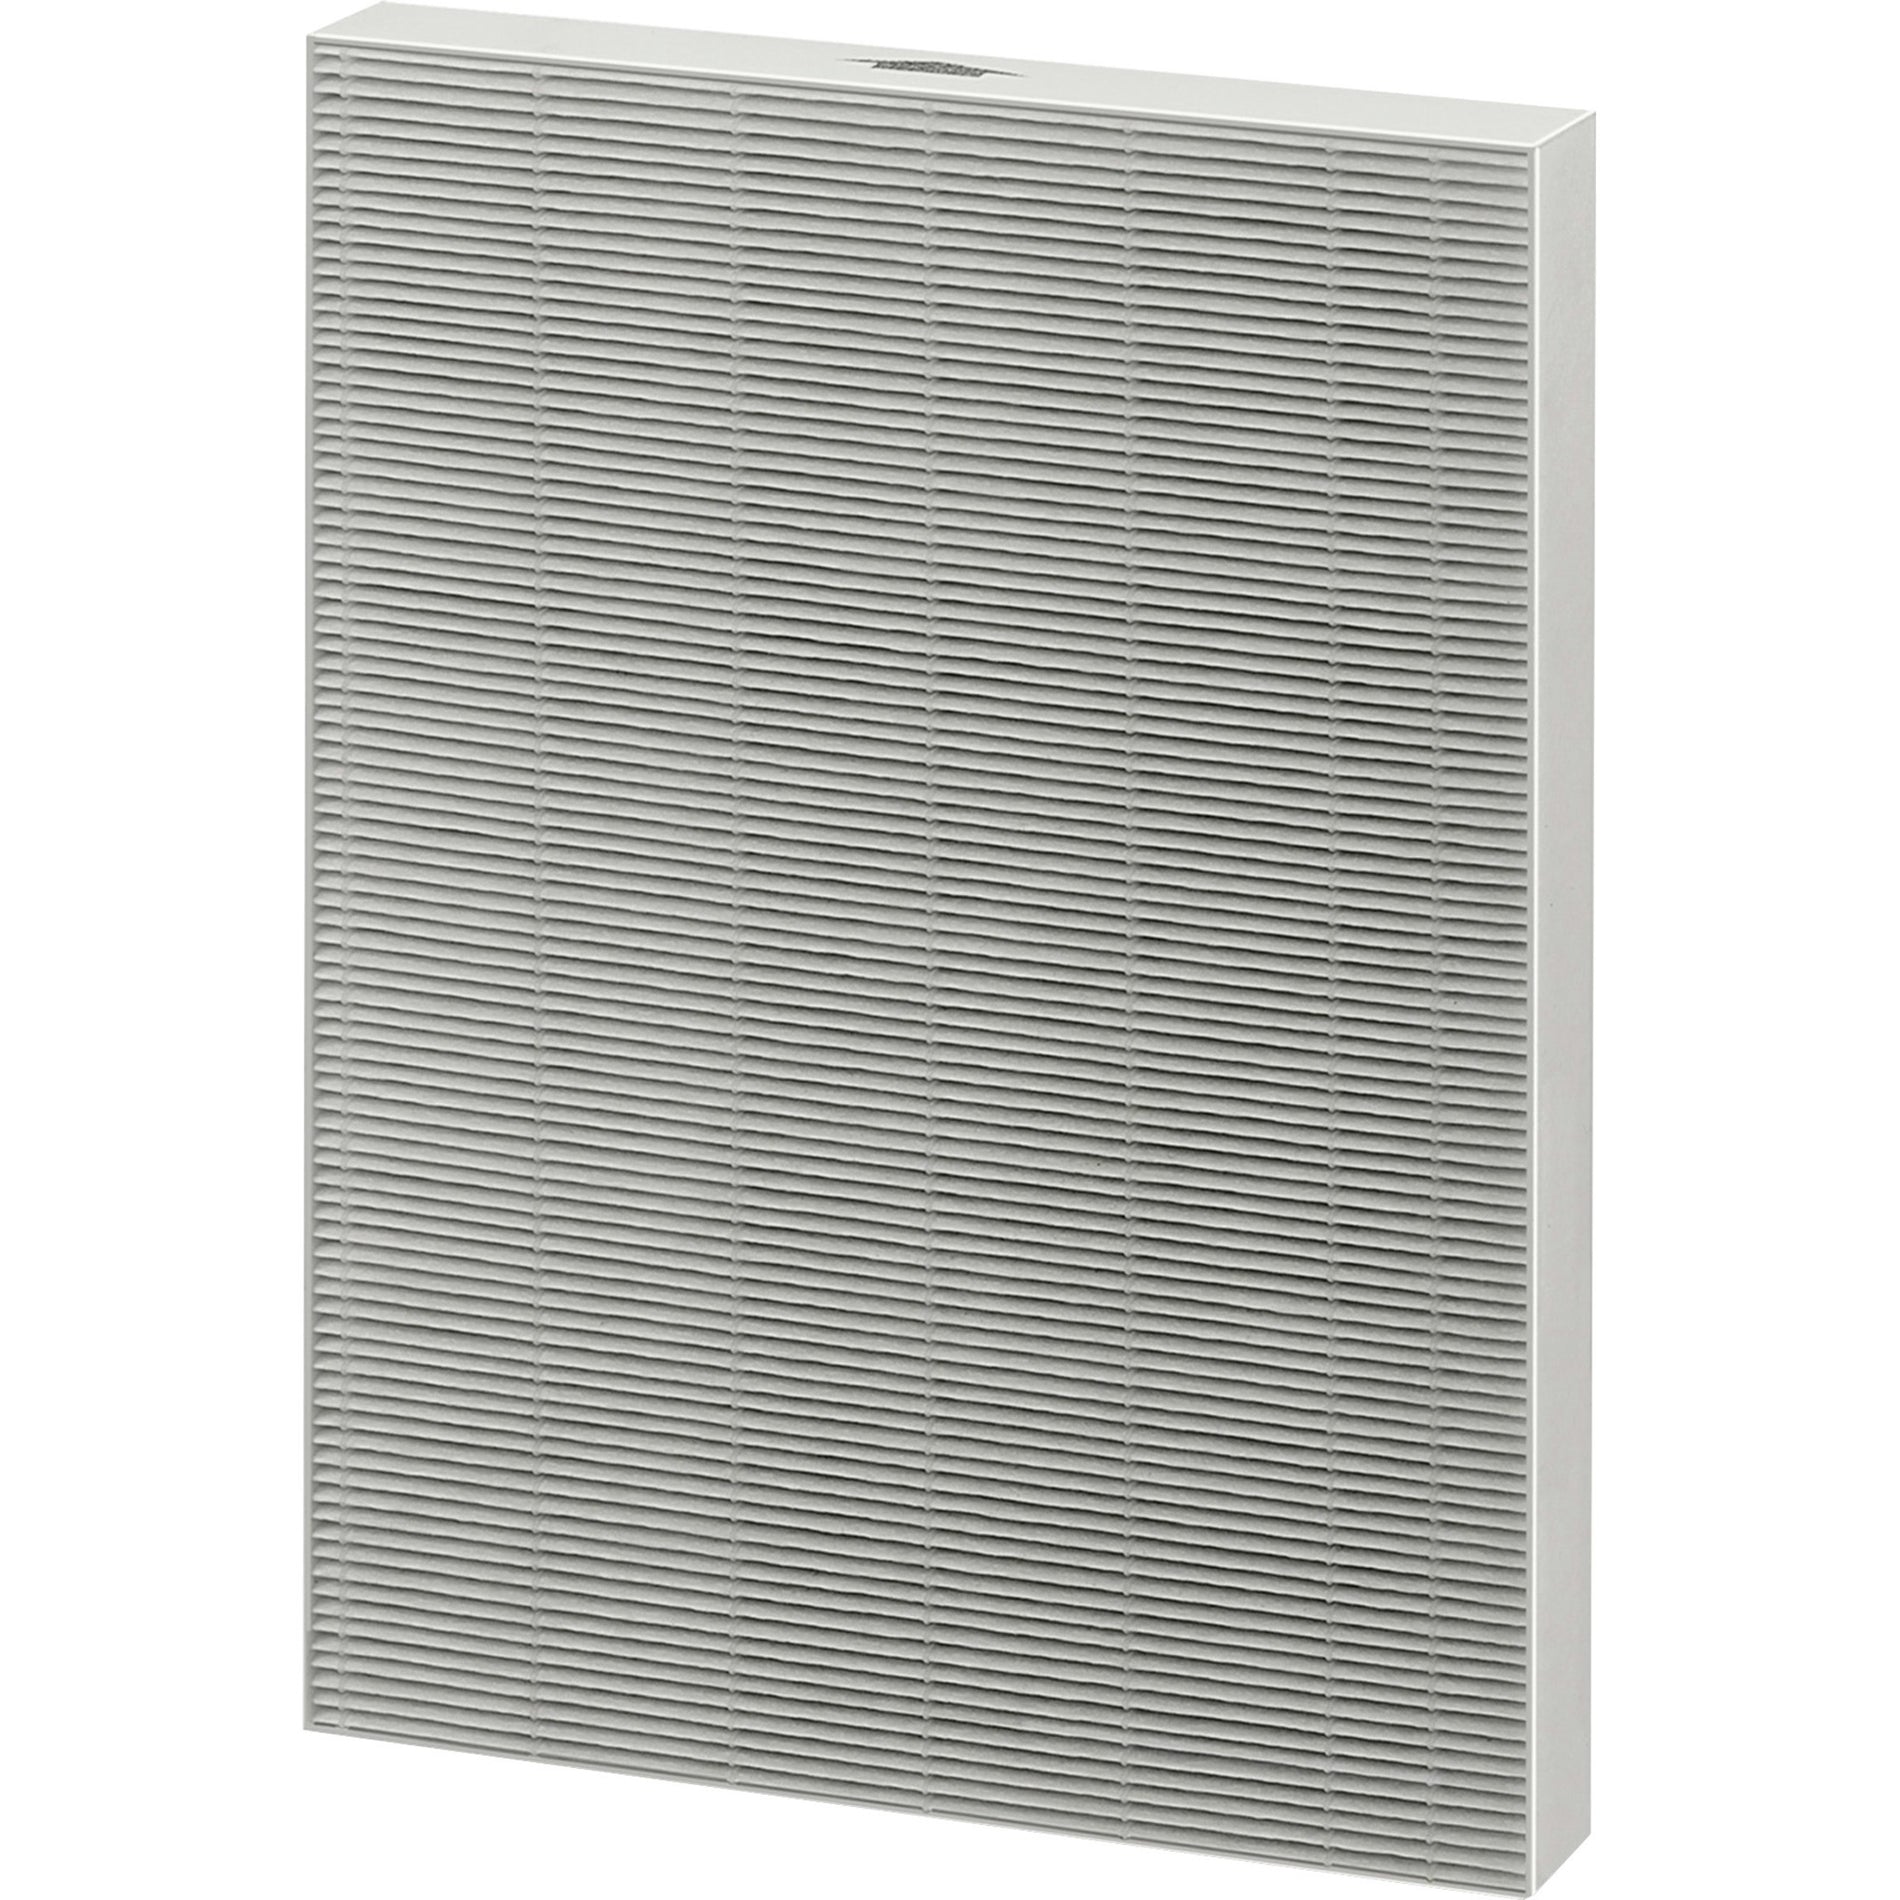 Fellowes 9370101 True HEPA Replacement Filter for AP-300PH Air Purifier, Remove Airborne Particles, Virus, Dust Mite, Germs, Pet Dander, Smoke, Ragweed, Odor, Mold Spores, Allergens, Pollen